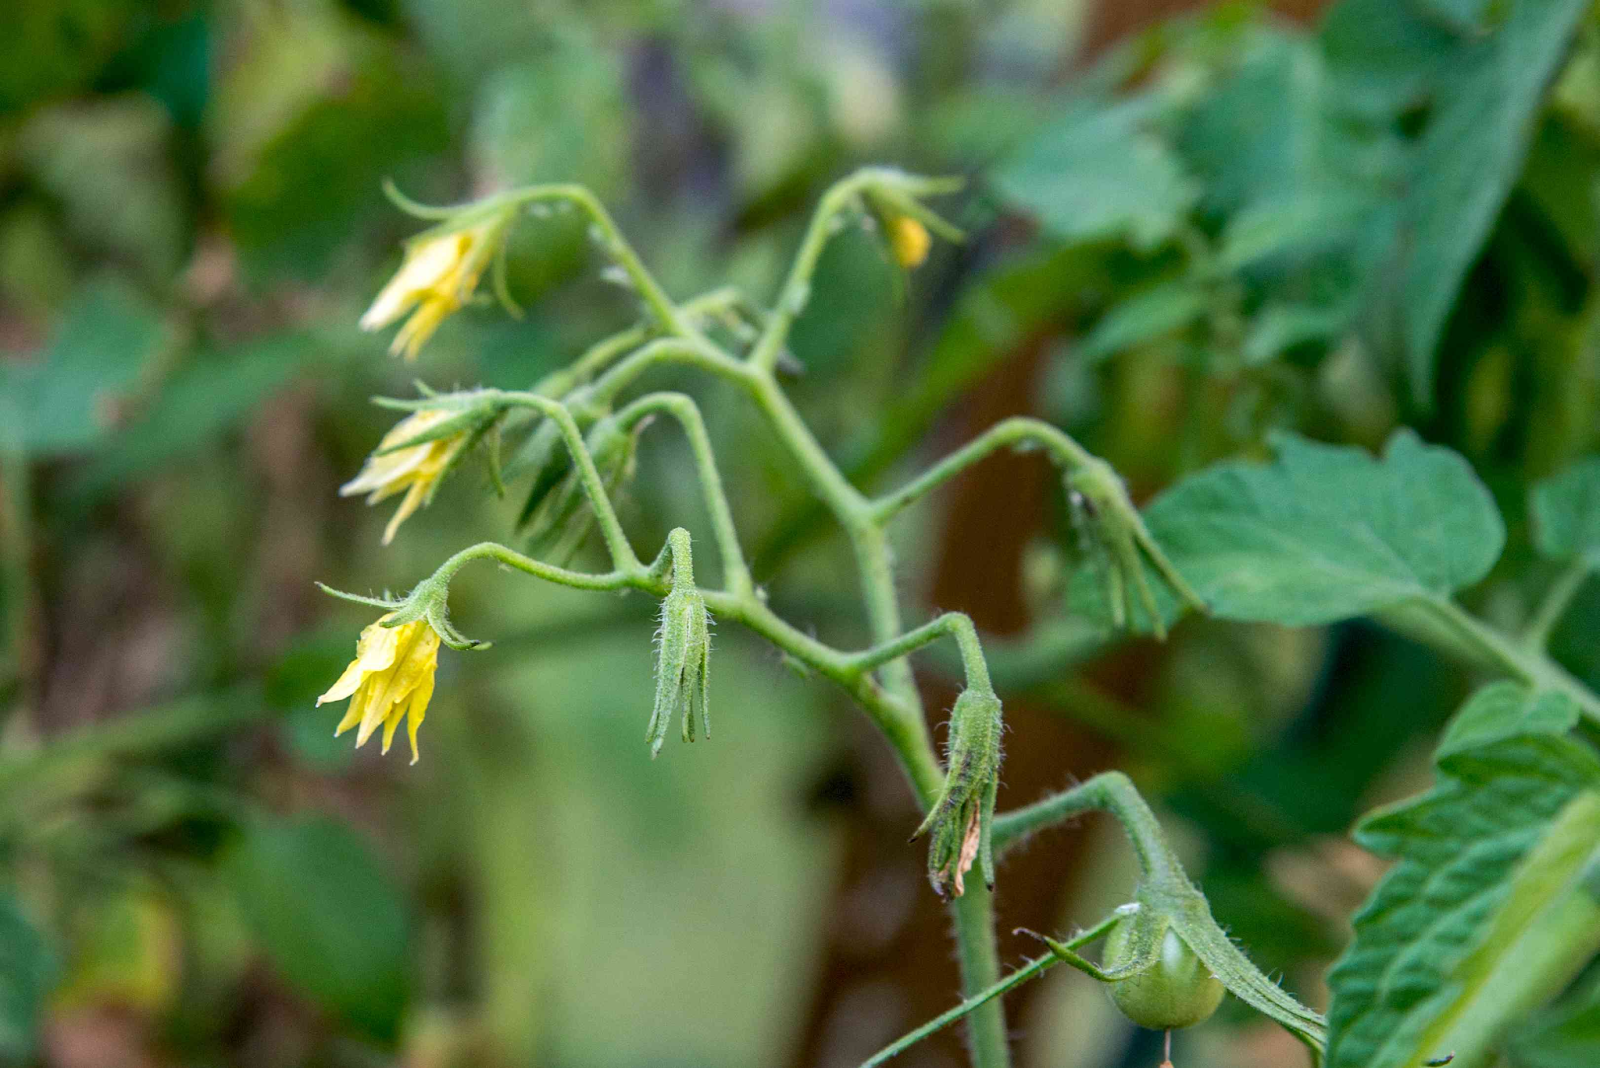 Why does tomato plant produce flowers but not fruits